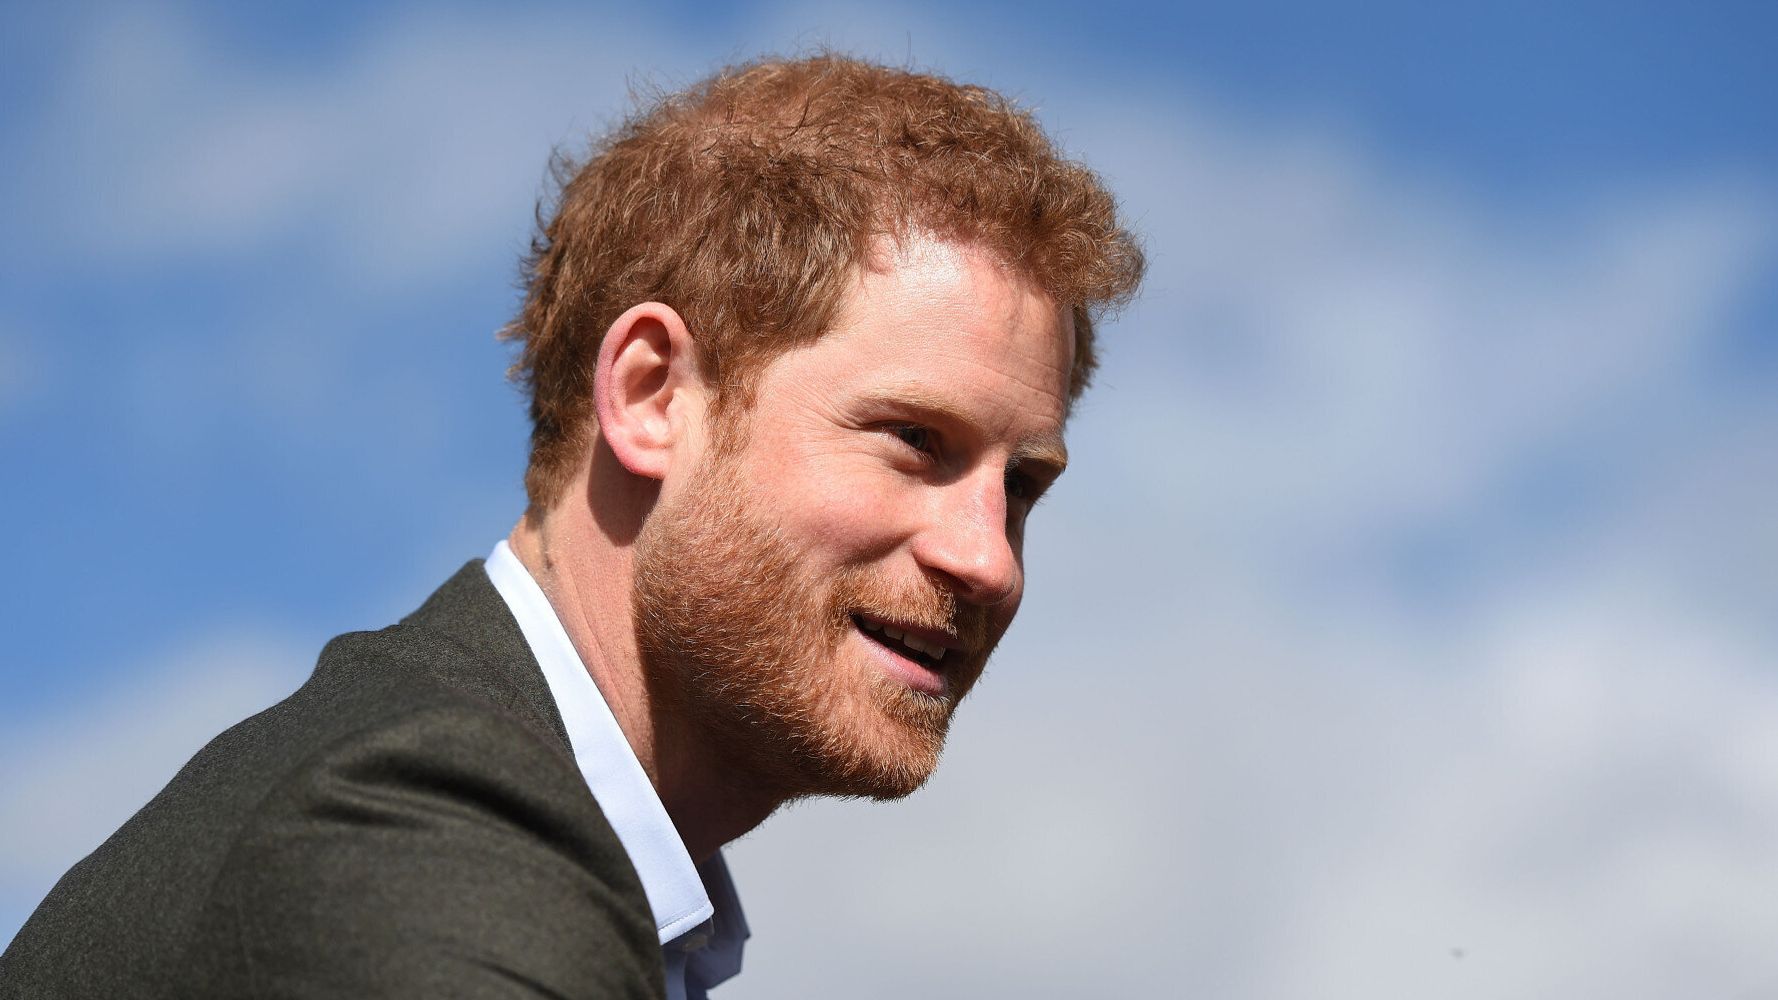 Prince Harry Has Ignited A National Debate On The Culture Of Men